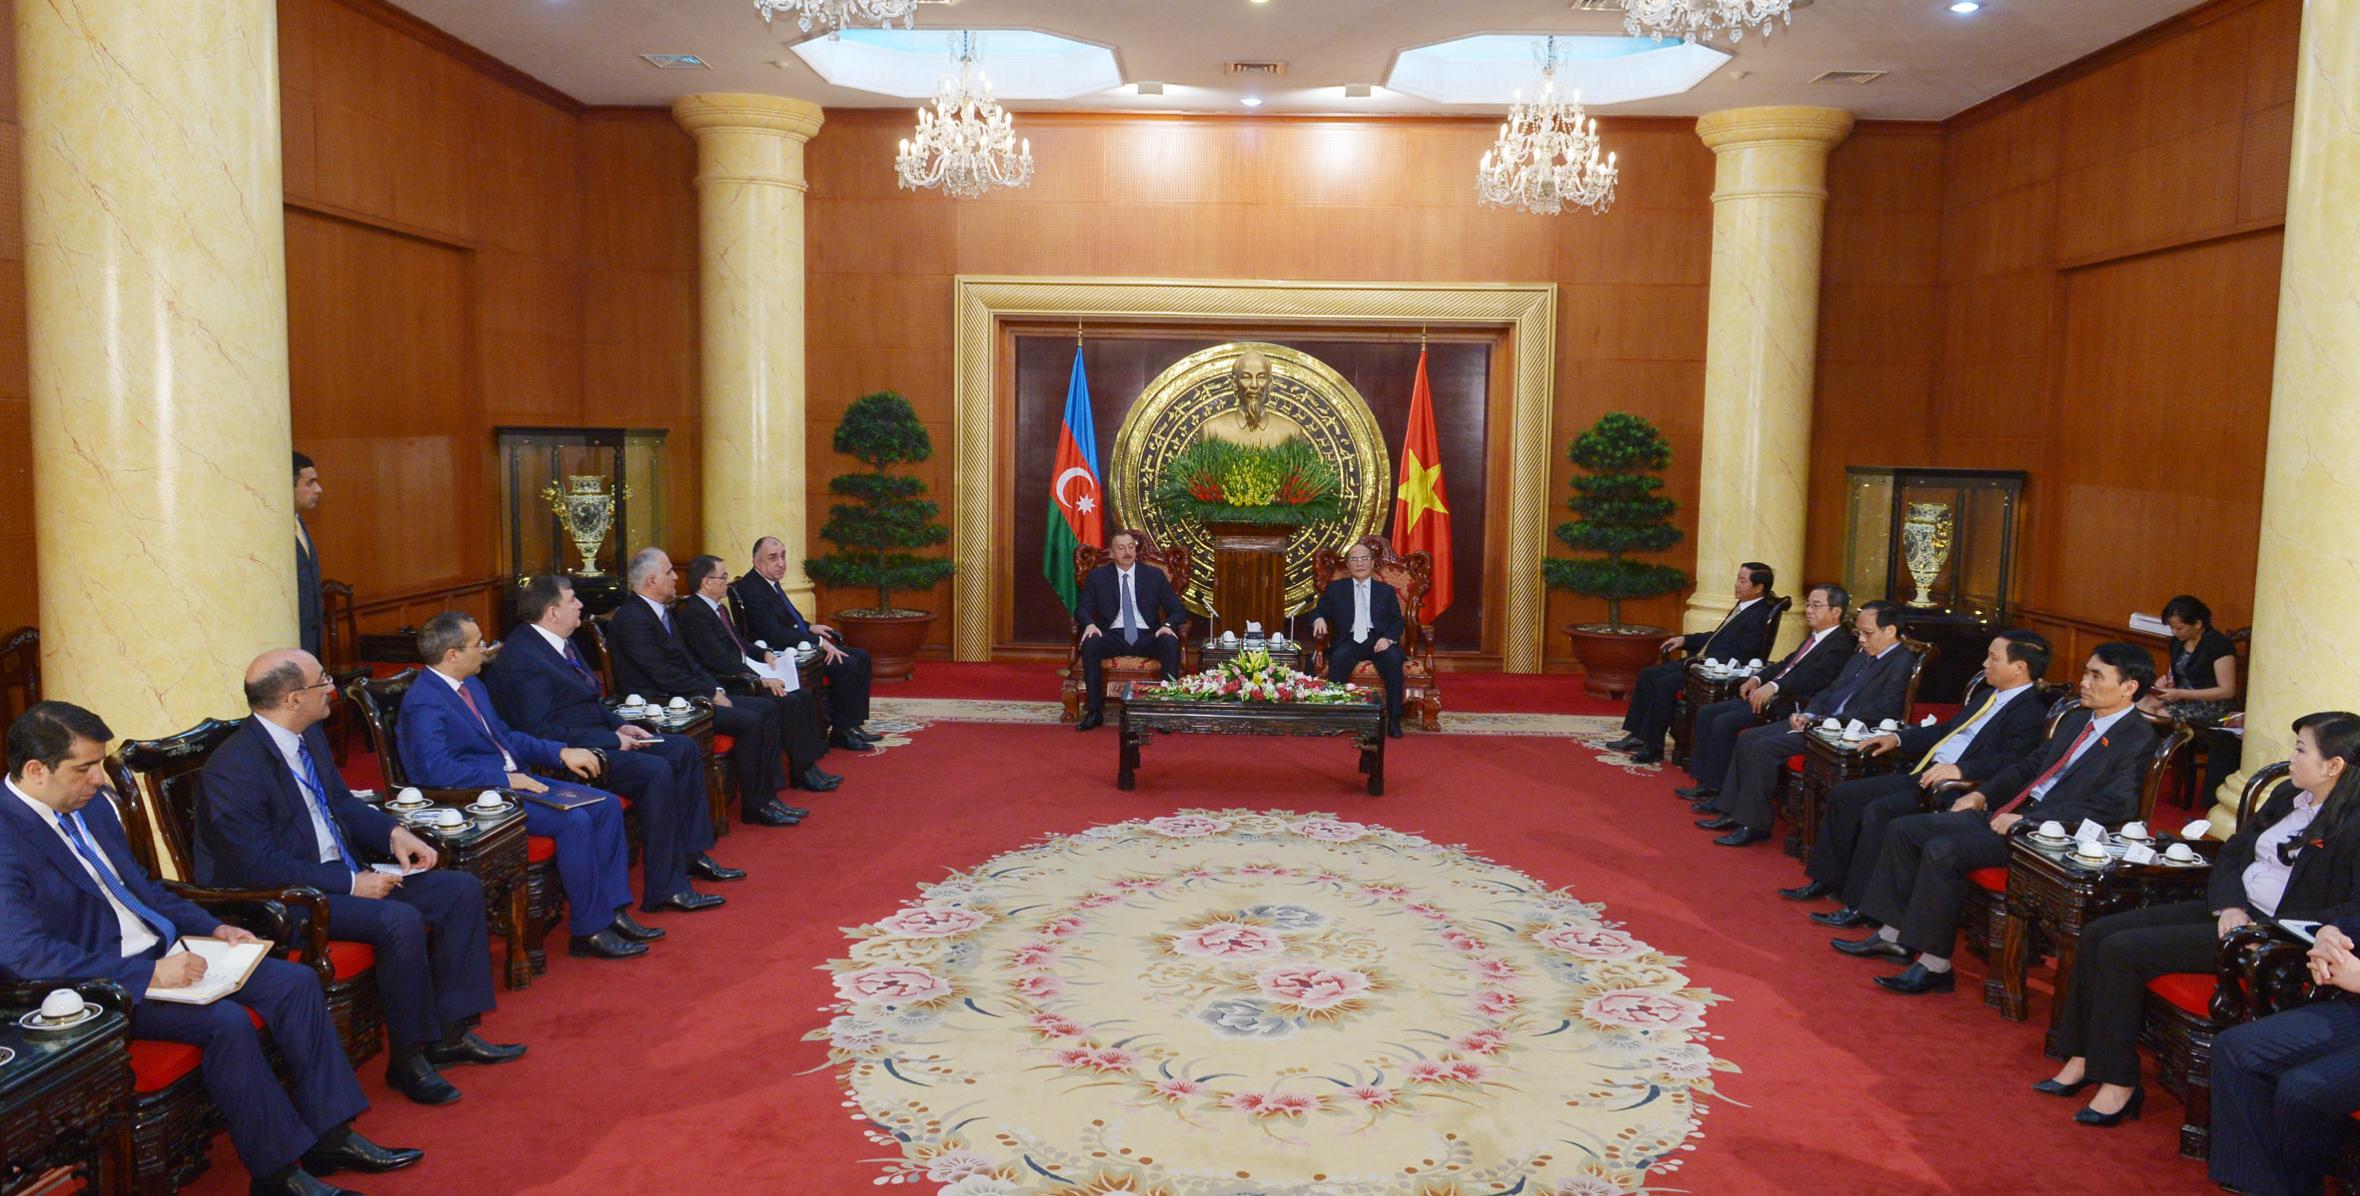 Ilham Aliyev met with the chairman of the National Assembly of Vietnam